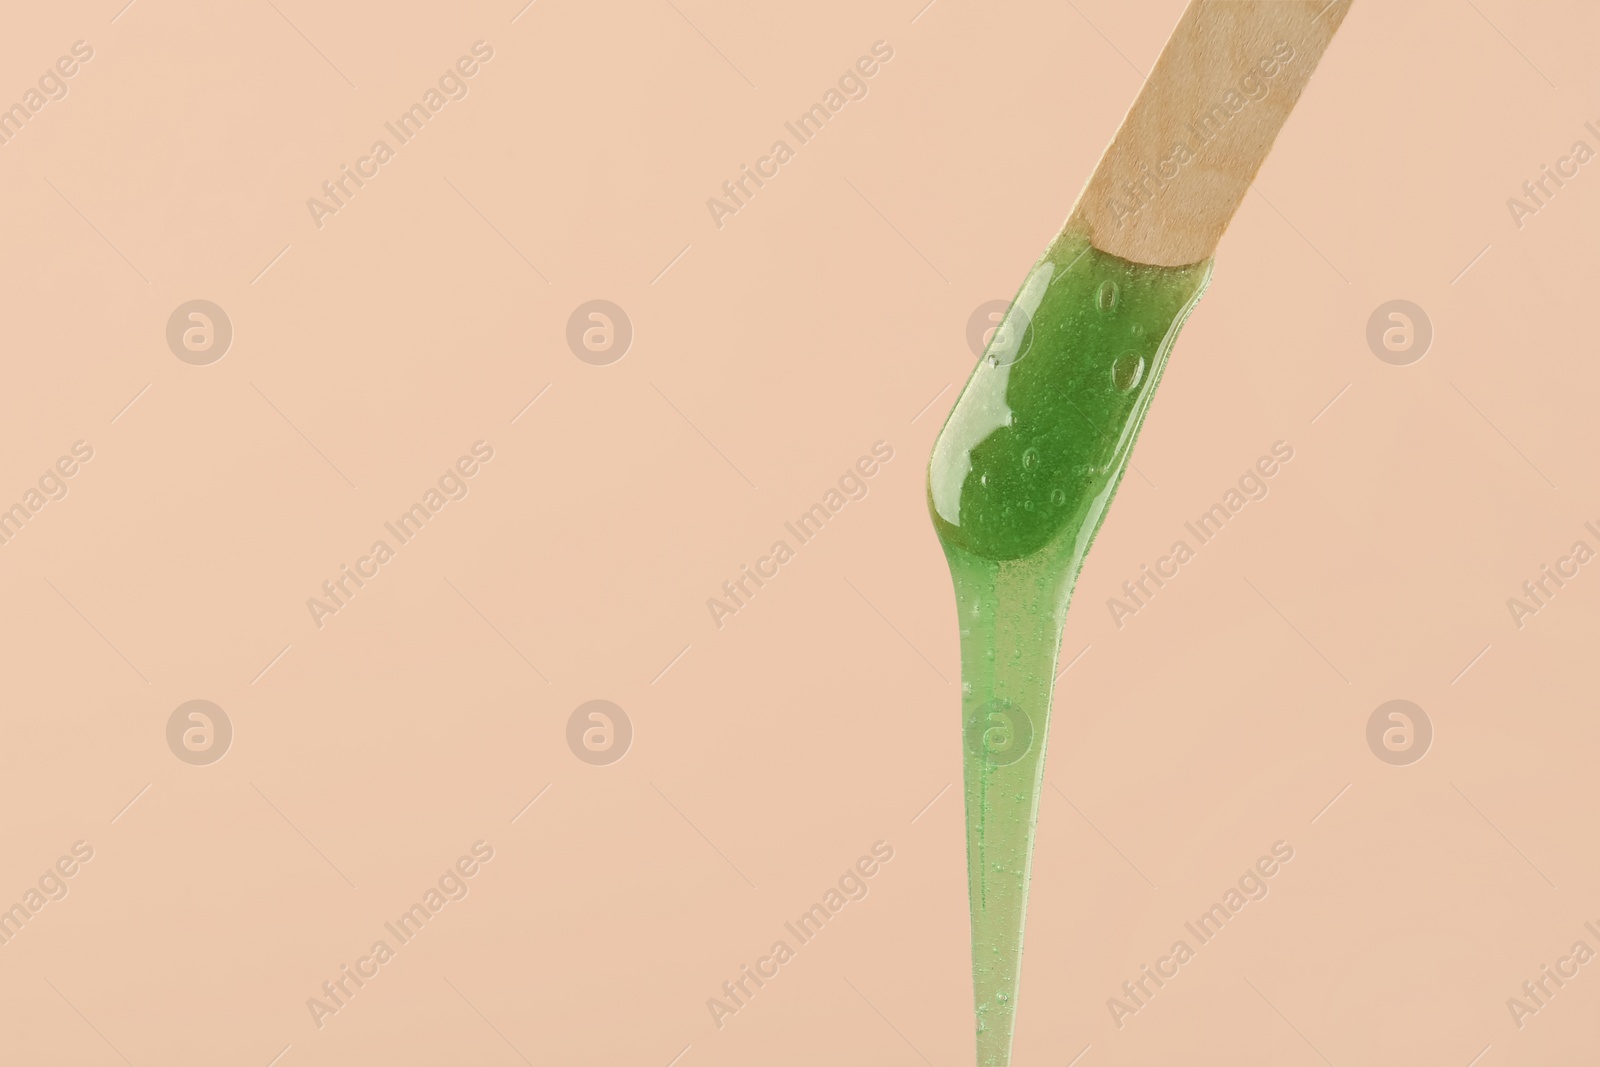 Photo of Wooden spatula with hot depilatory wax on beige background. Space for text